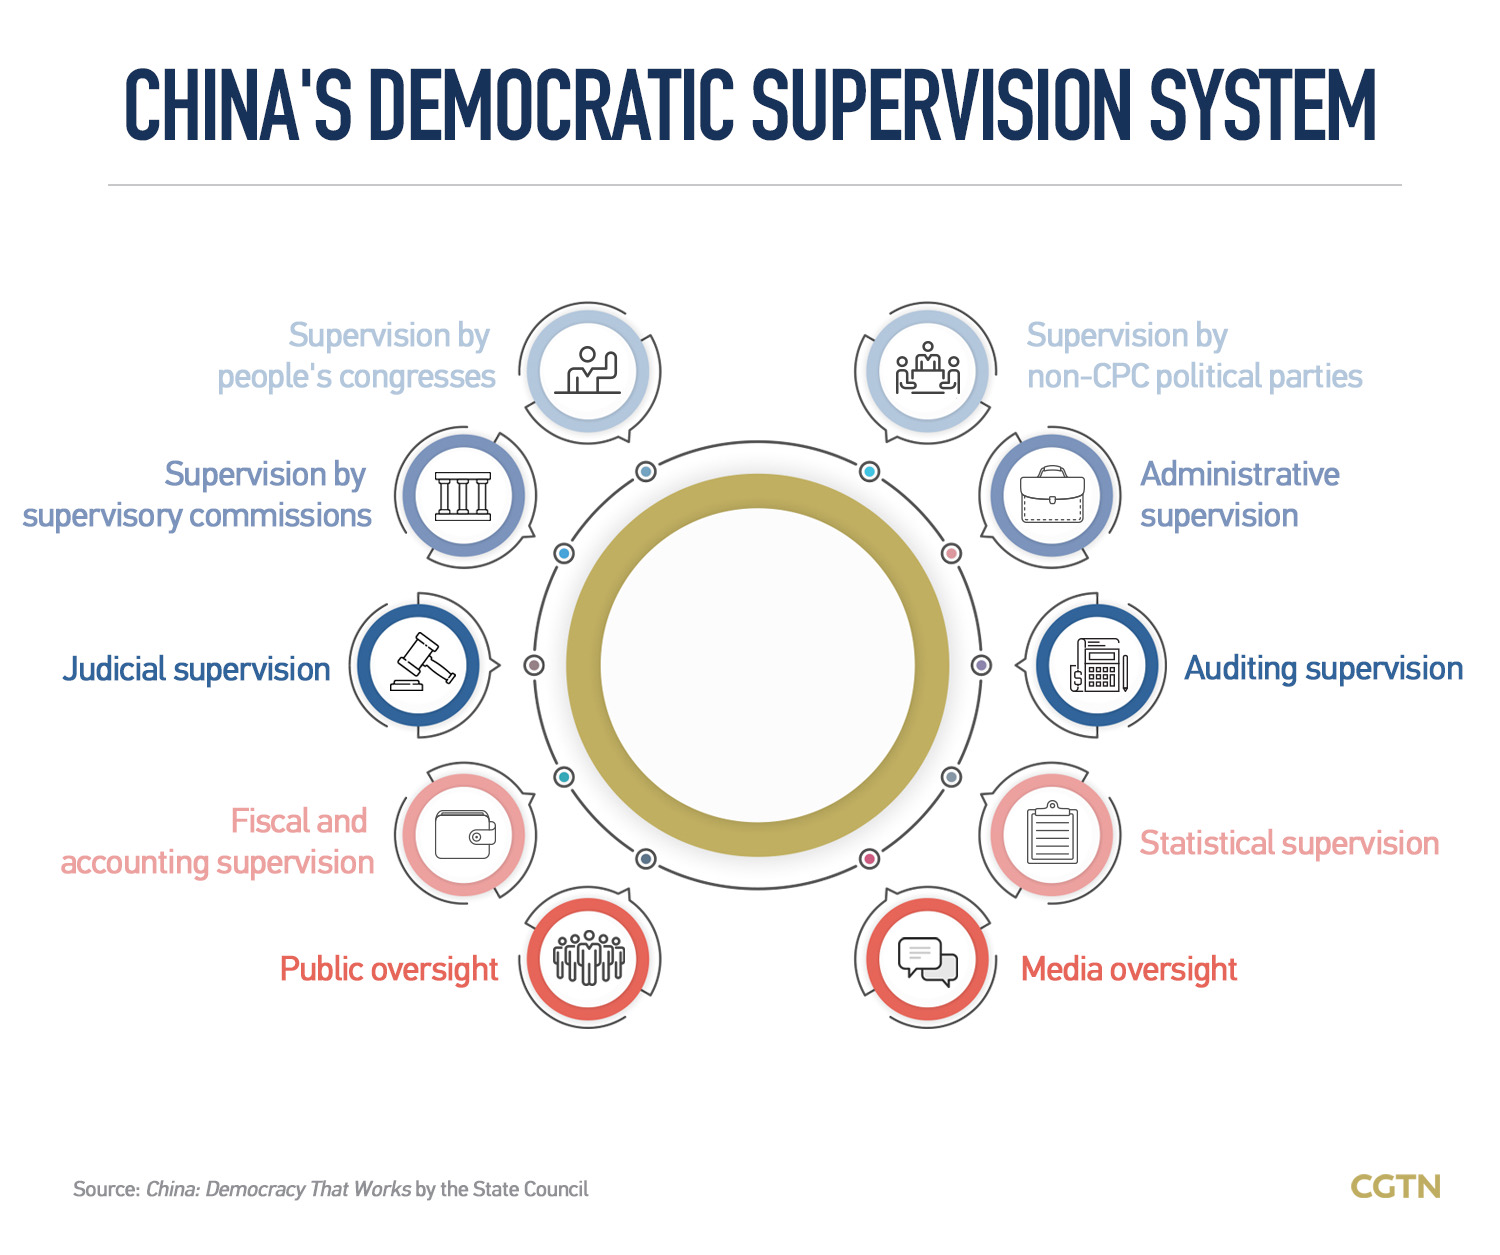 How China's democratic supervision system works